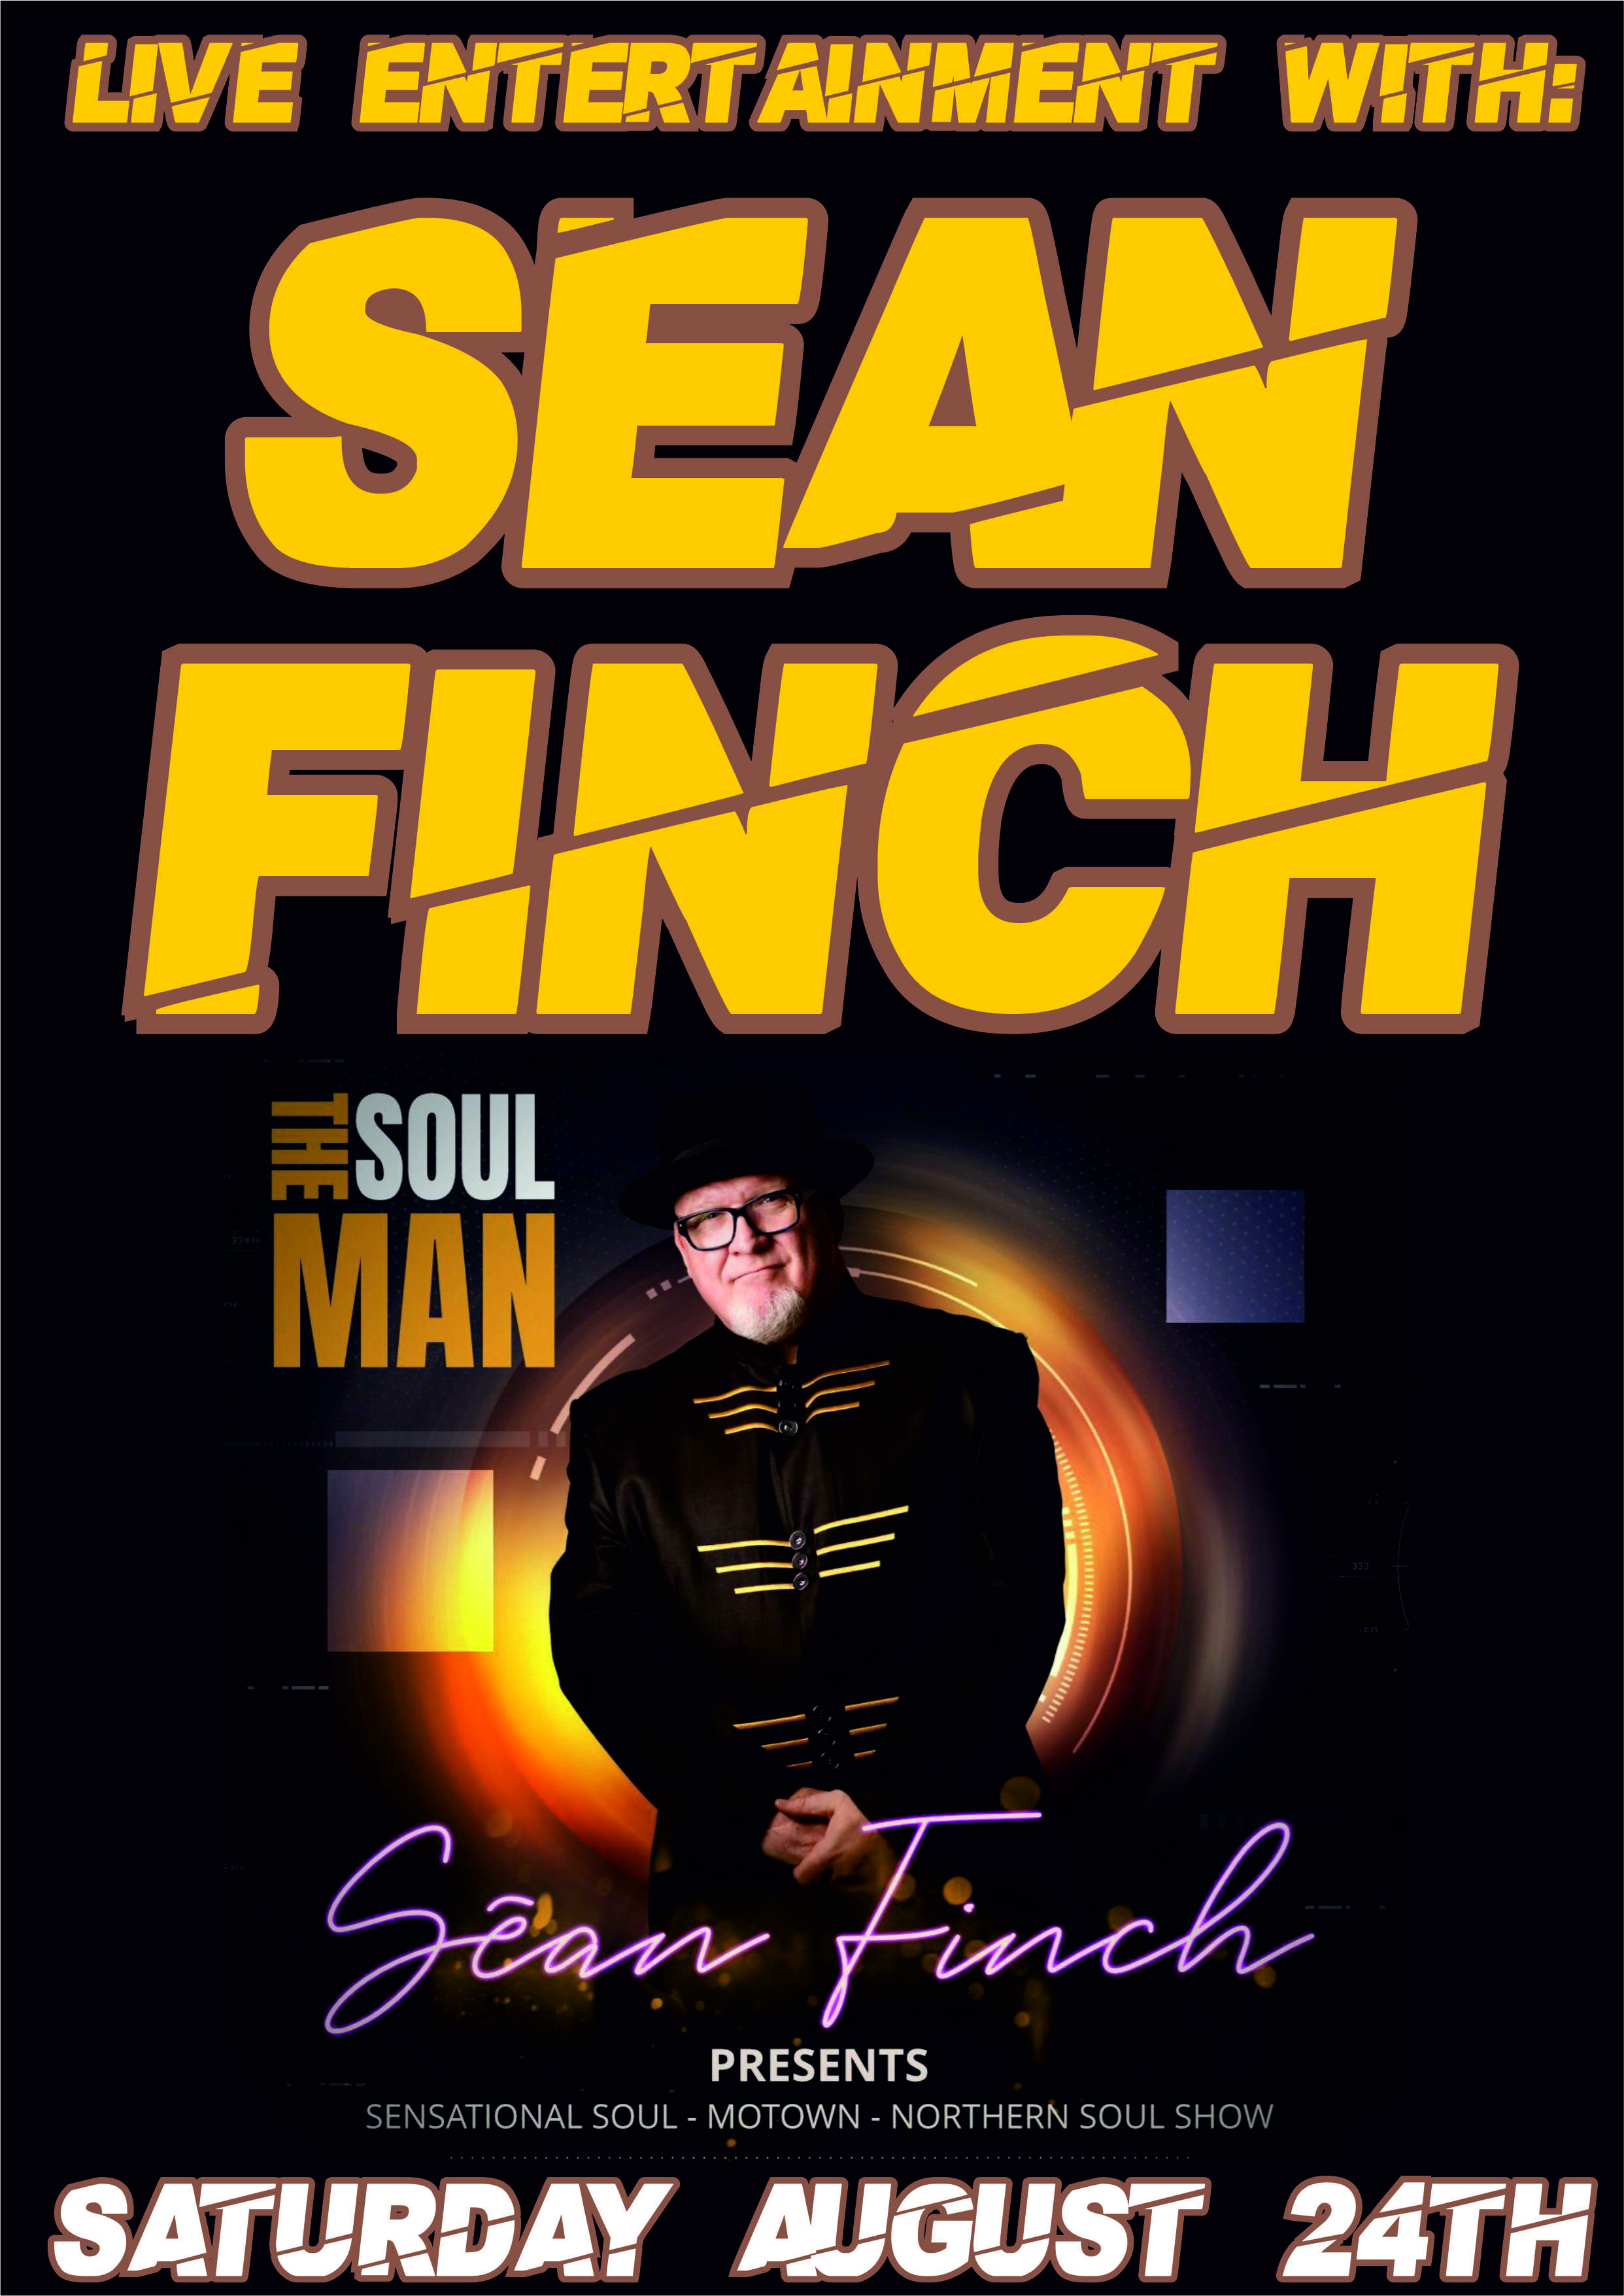 Live Entertainment with Sean Finch